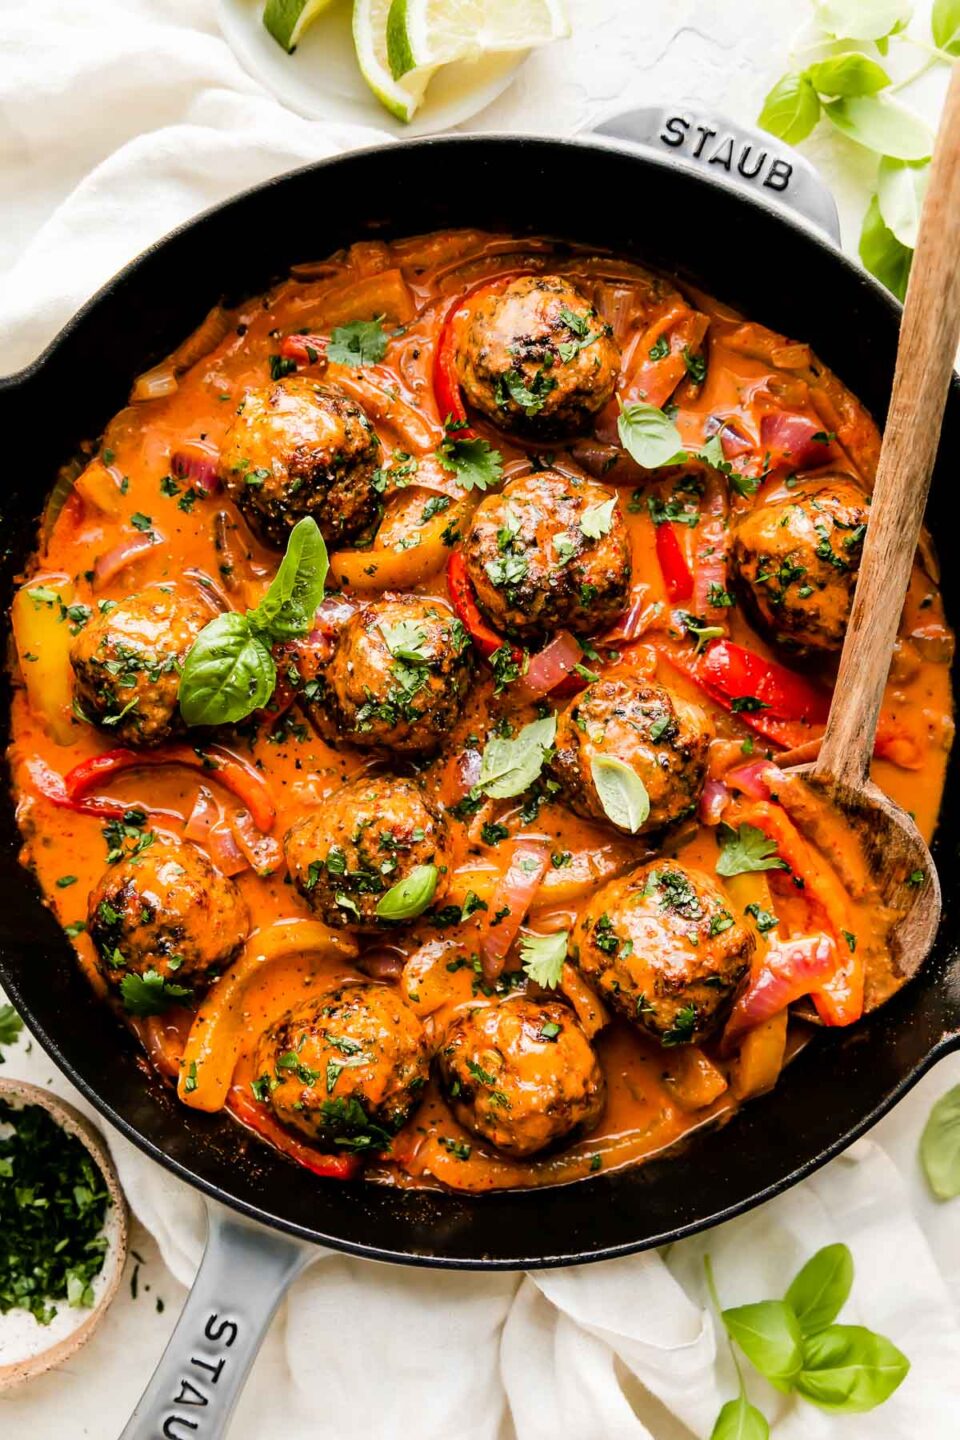 Red curry meatballs fill a large gray Staub cast iron skillet that sits atop a creamy white textured surface. The meatballs have been garnished with fresh basil and cilantro. A wooden serving spoon rests inside of the skillet and the skillet is surrounded by fresh basil leaves, a small wooden pinch bowl filled with chopped cilantro, and a small white plate topped with sliced lime. A light off white linen napkin is tucked underneath the skillet at center.